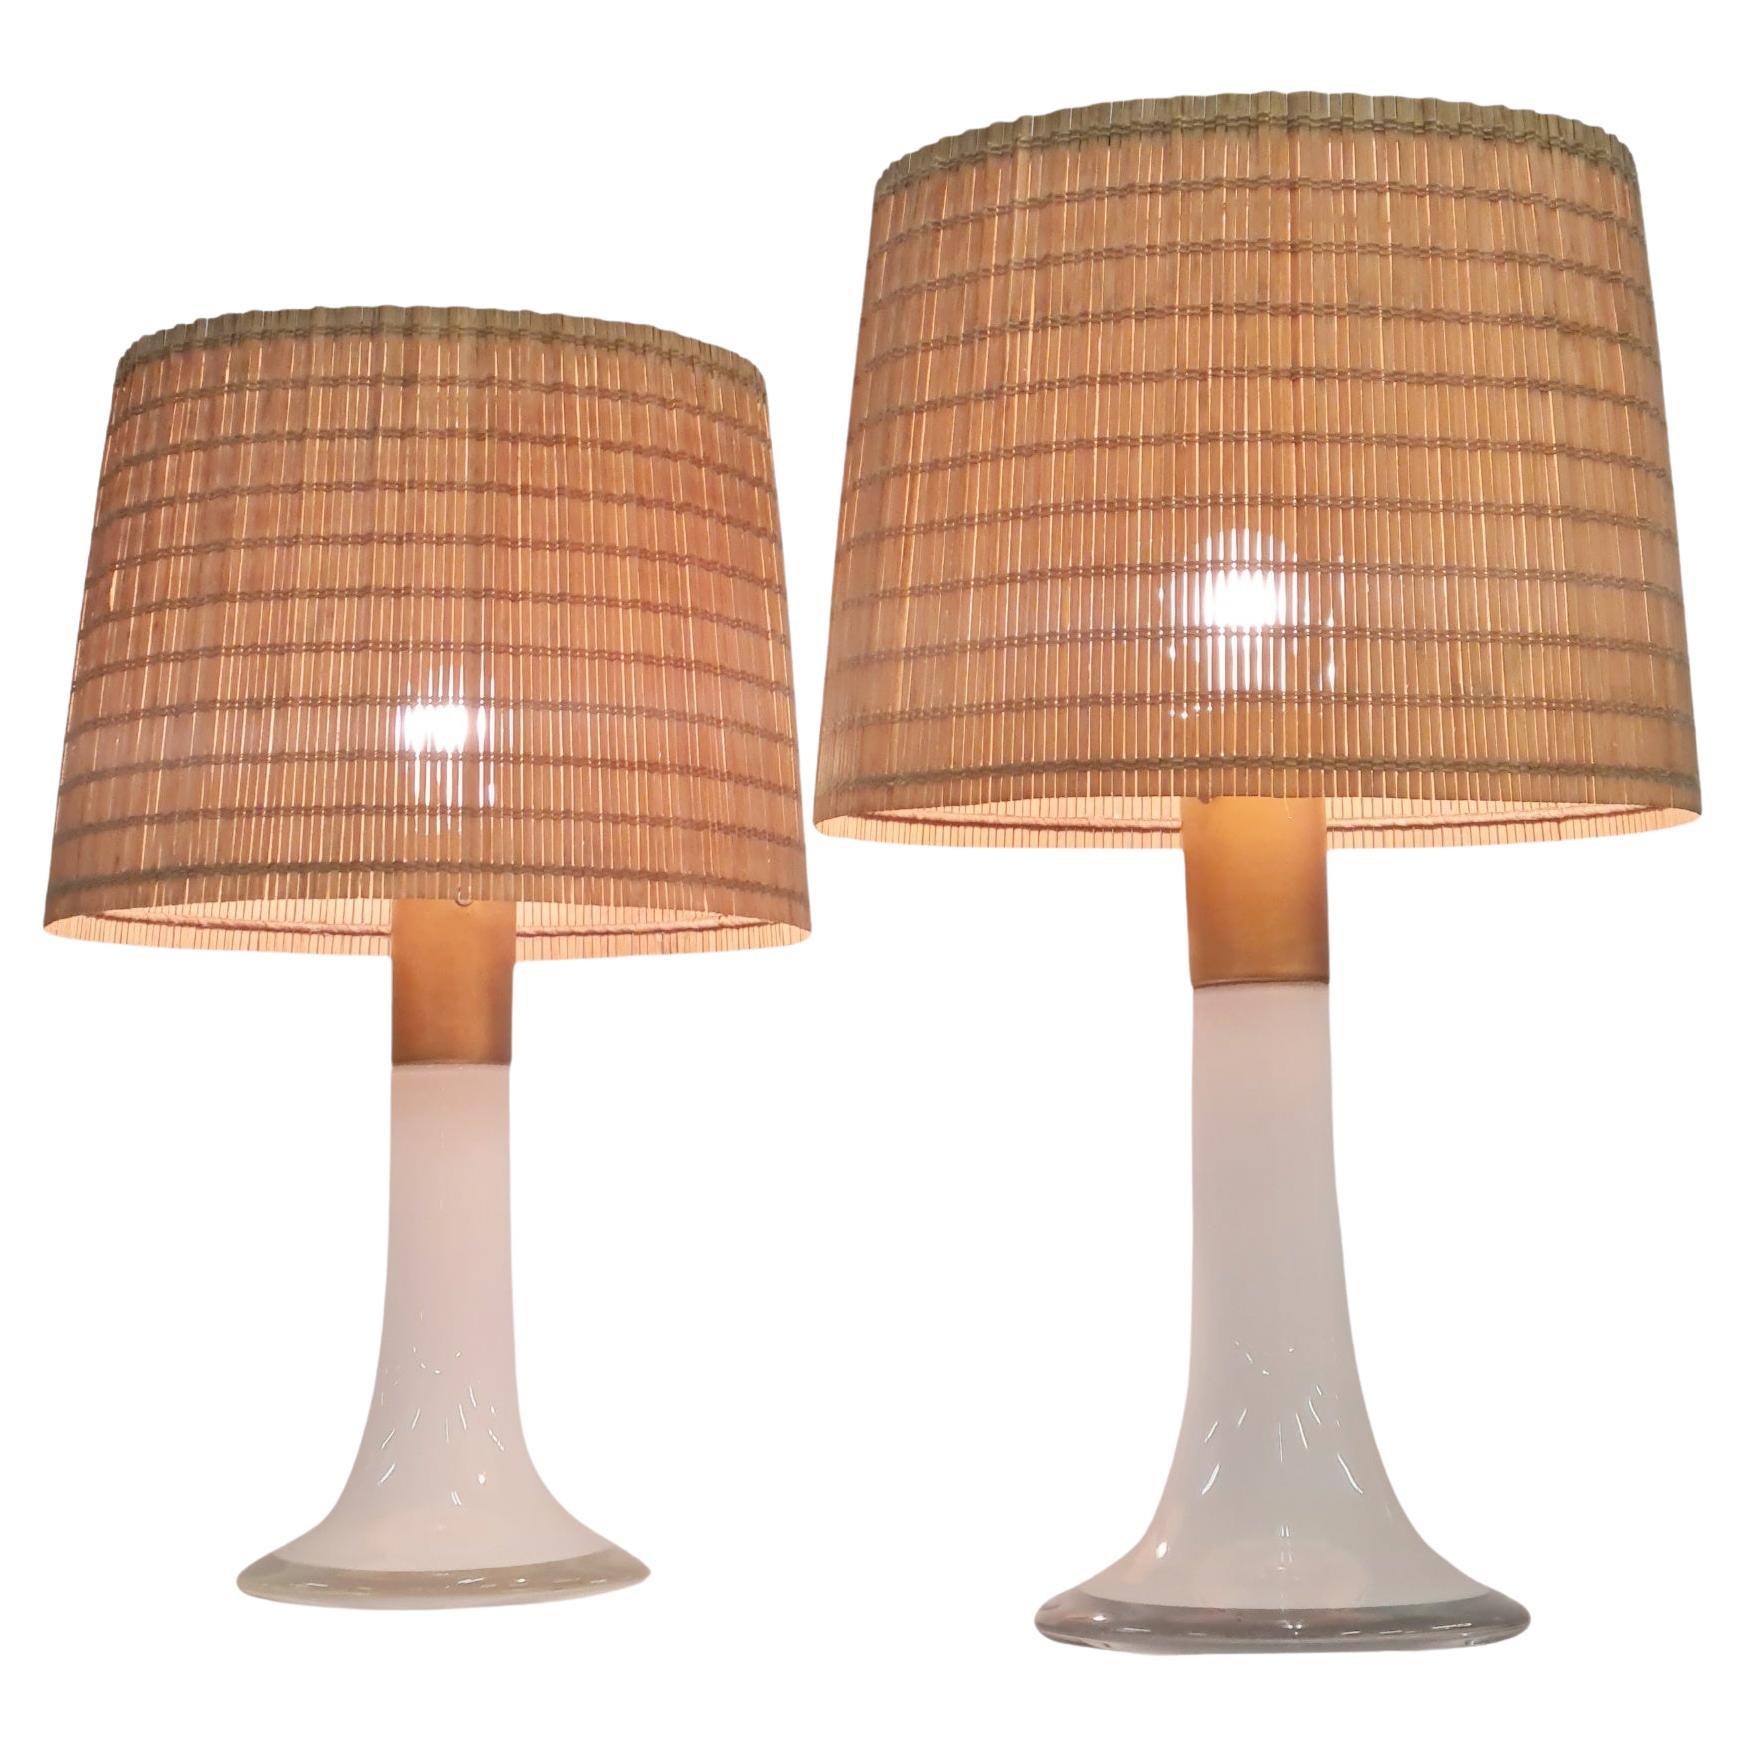 Lisa Johansson Pape Pair of Table Lamps Model 46-017, Orno 1960s For Sale